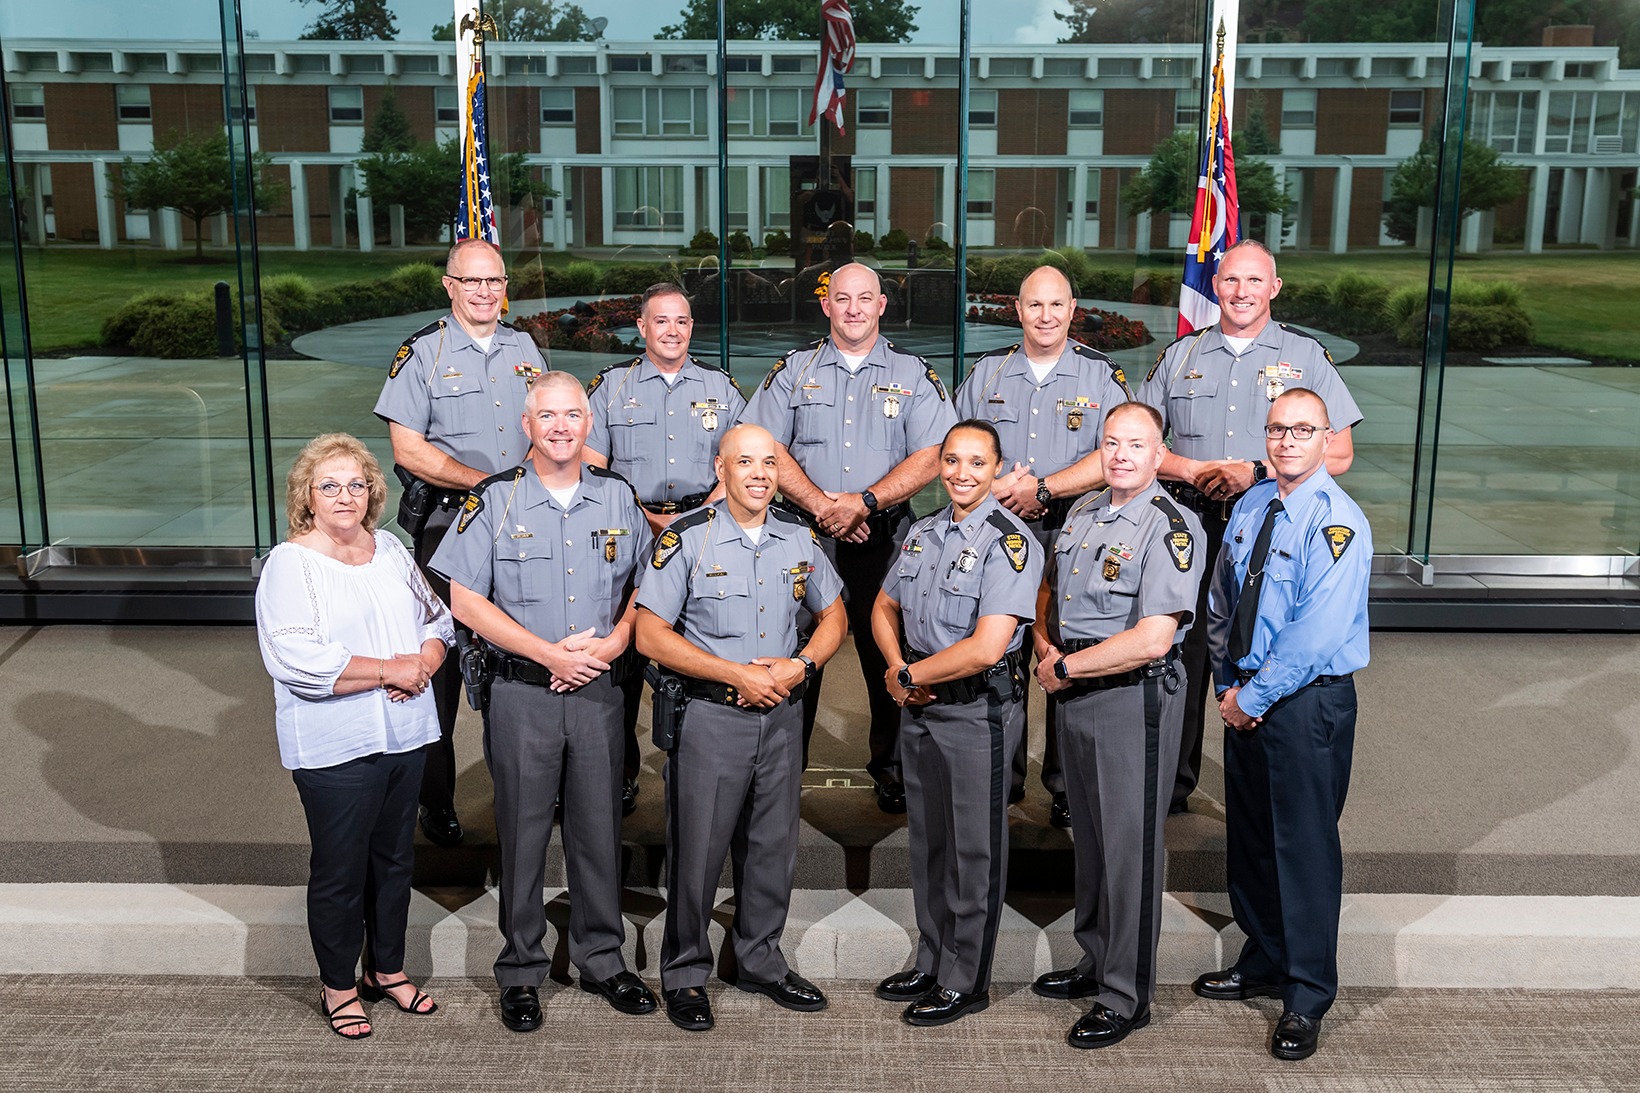 Promotions awarded to Bowers and Crow of Findlay OSHP